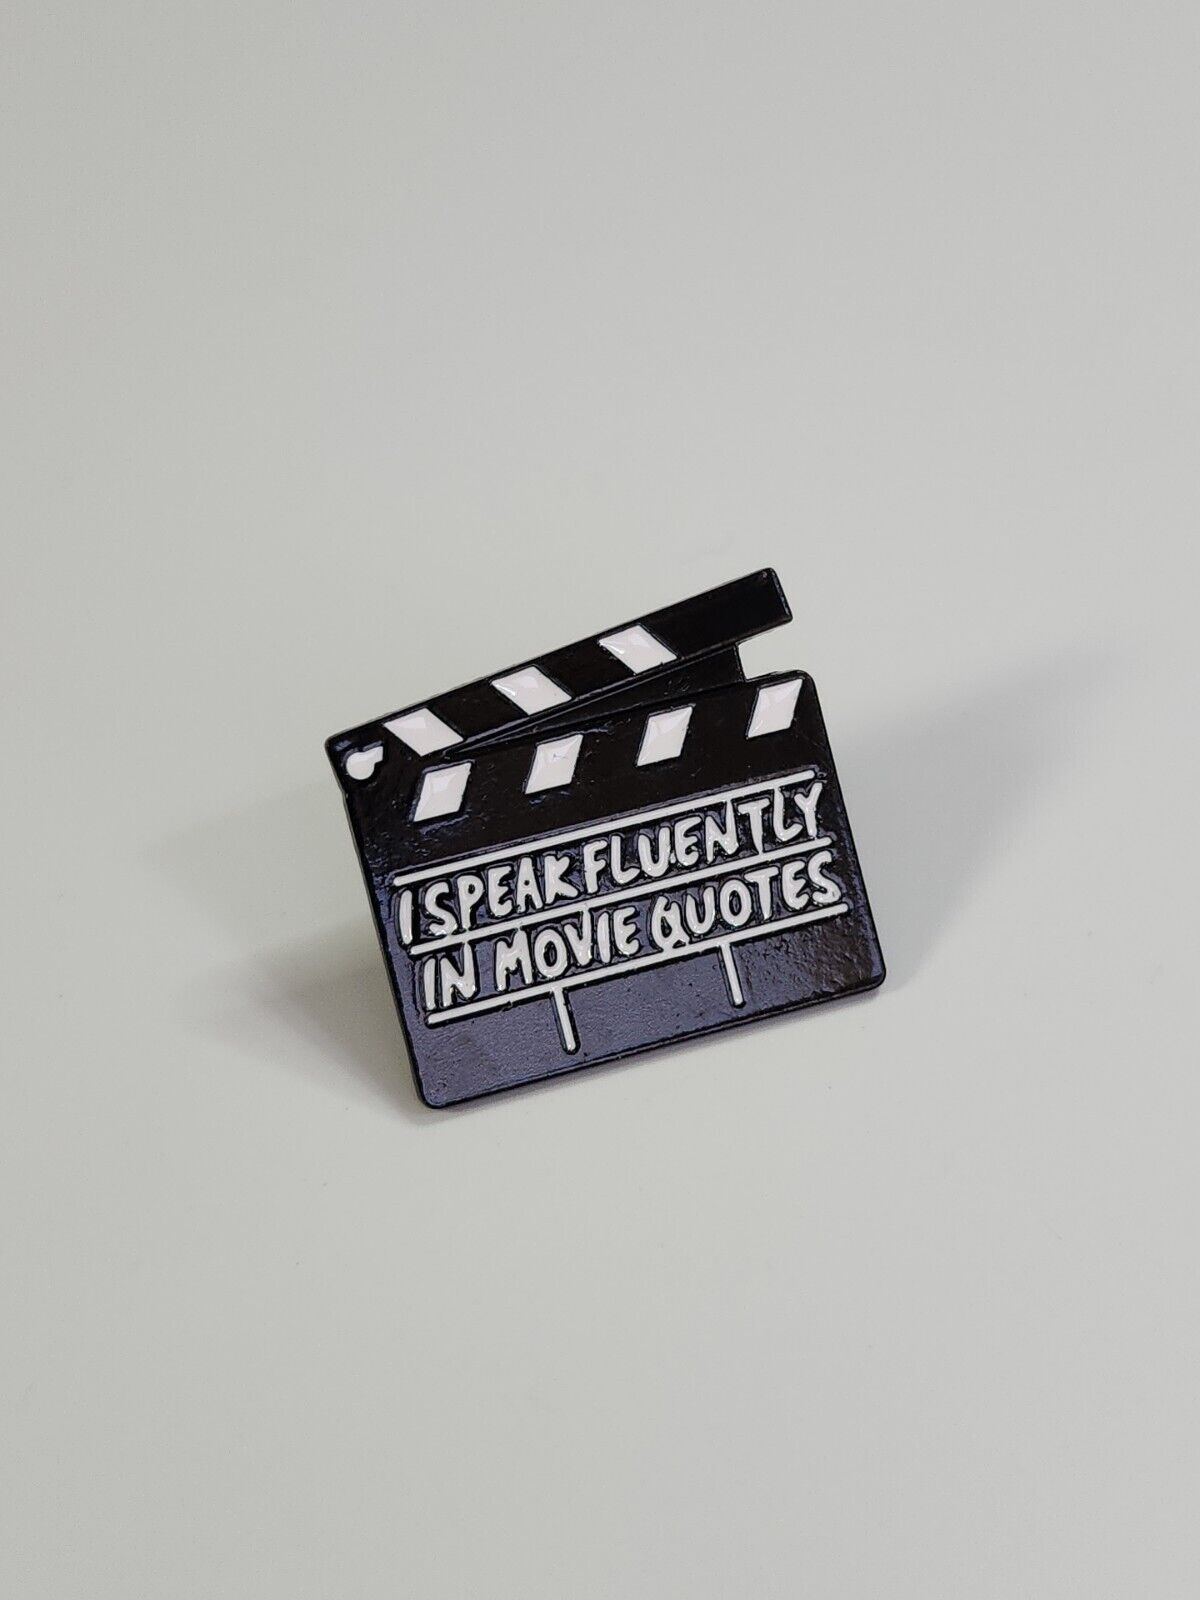 I Speak Fluently in Movie Quotes Lapel Pin Black & White Colors Clapboard